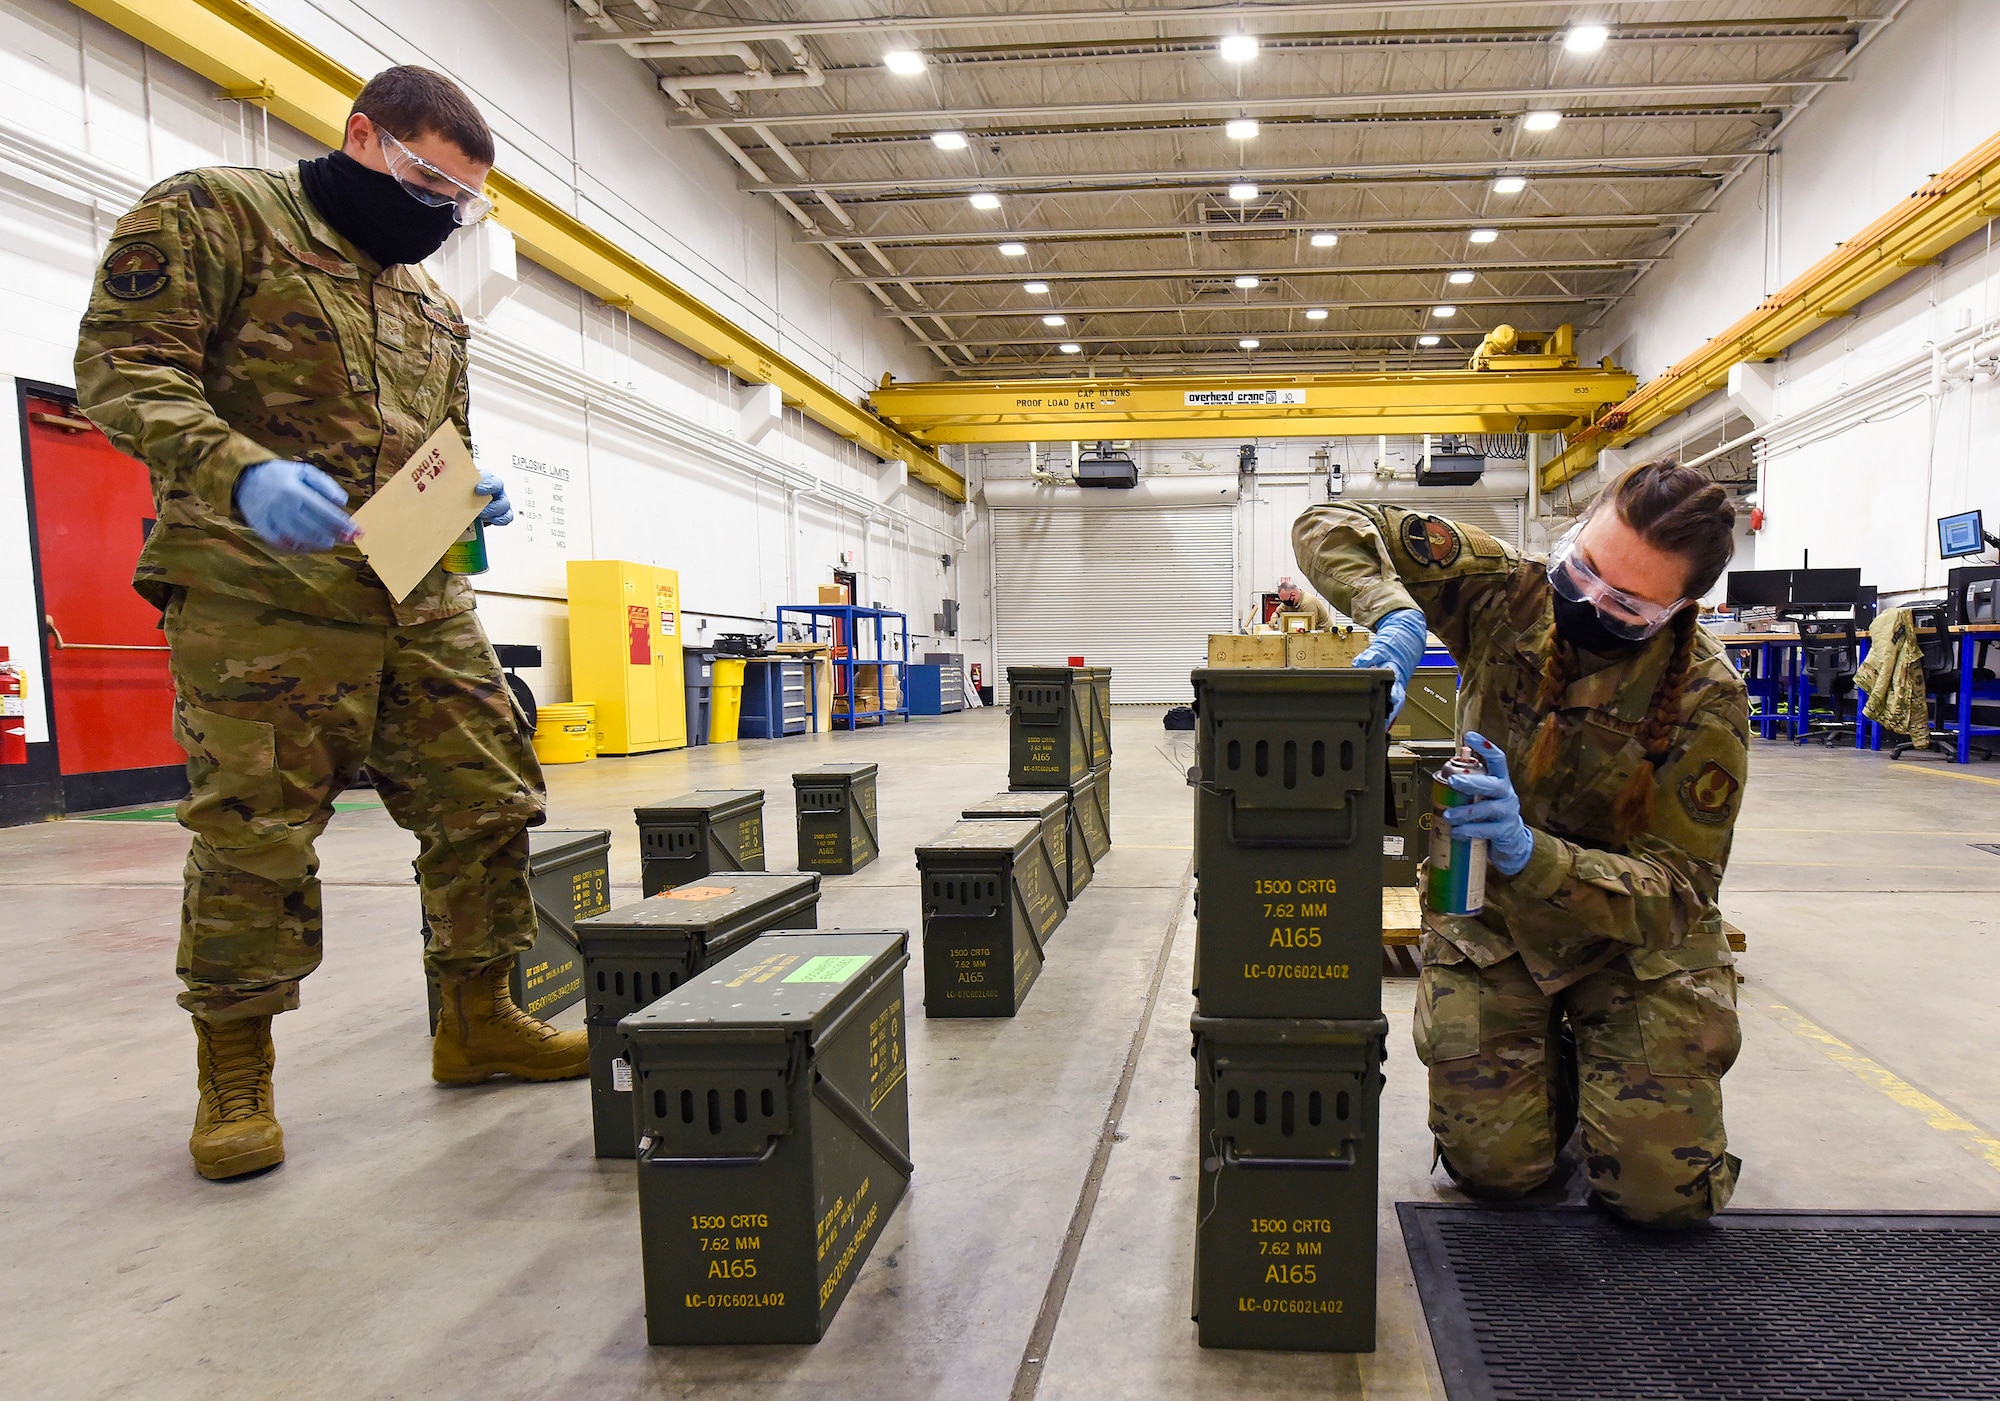 Senior Airman Ryan Klingbeil, an 88th Operations Support Squadron storage crew chief, and Staff Sgt. Jacklyn Hill, an 88 OSS munitions inspector, stencil ammo boxes they are packing March 3, 2021, at Wright-Patterson Air Force Base, Ohio. The Munitions Flight ships, stores, inspects, receipts and accounts for all ammo assets on Wright-Patt. (U.S. Air Force photo by Ty Greenlees)